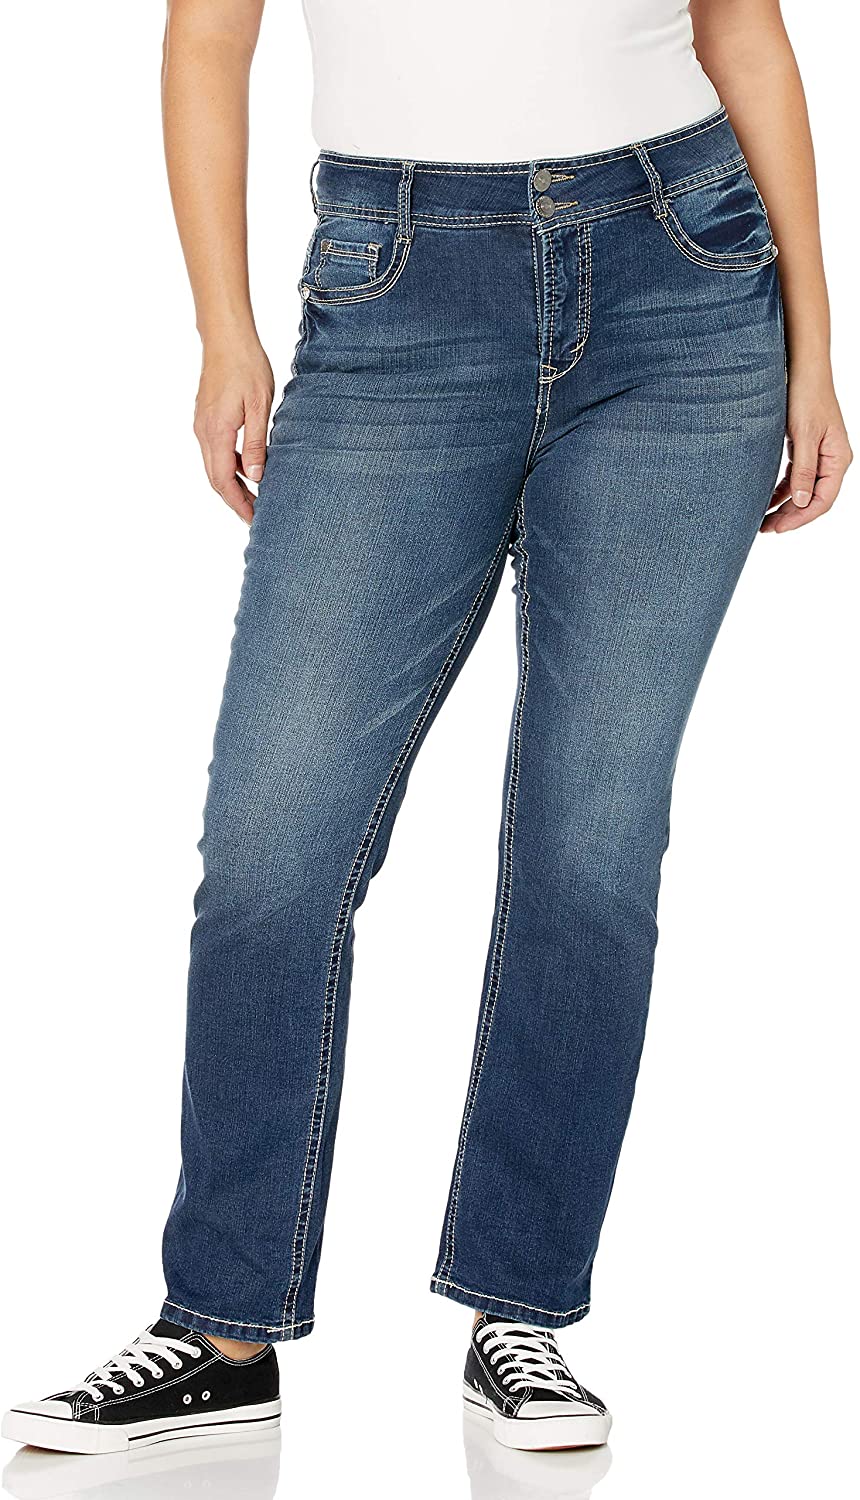 NWT Womens Wall Flower Slim Boot Jeans With A Belt Size 18 Regular 